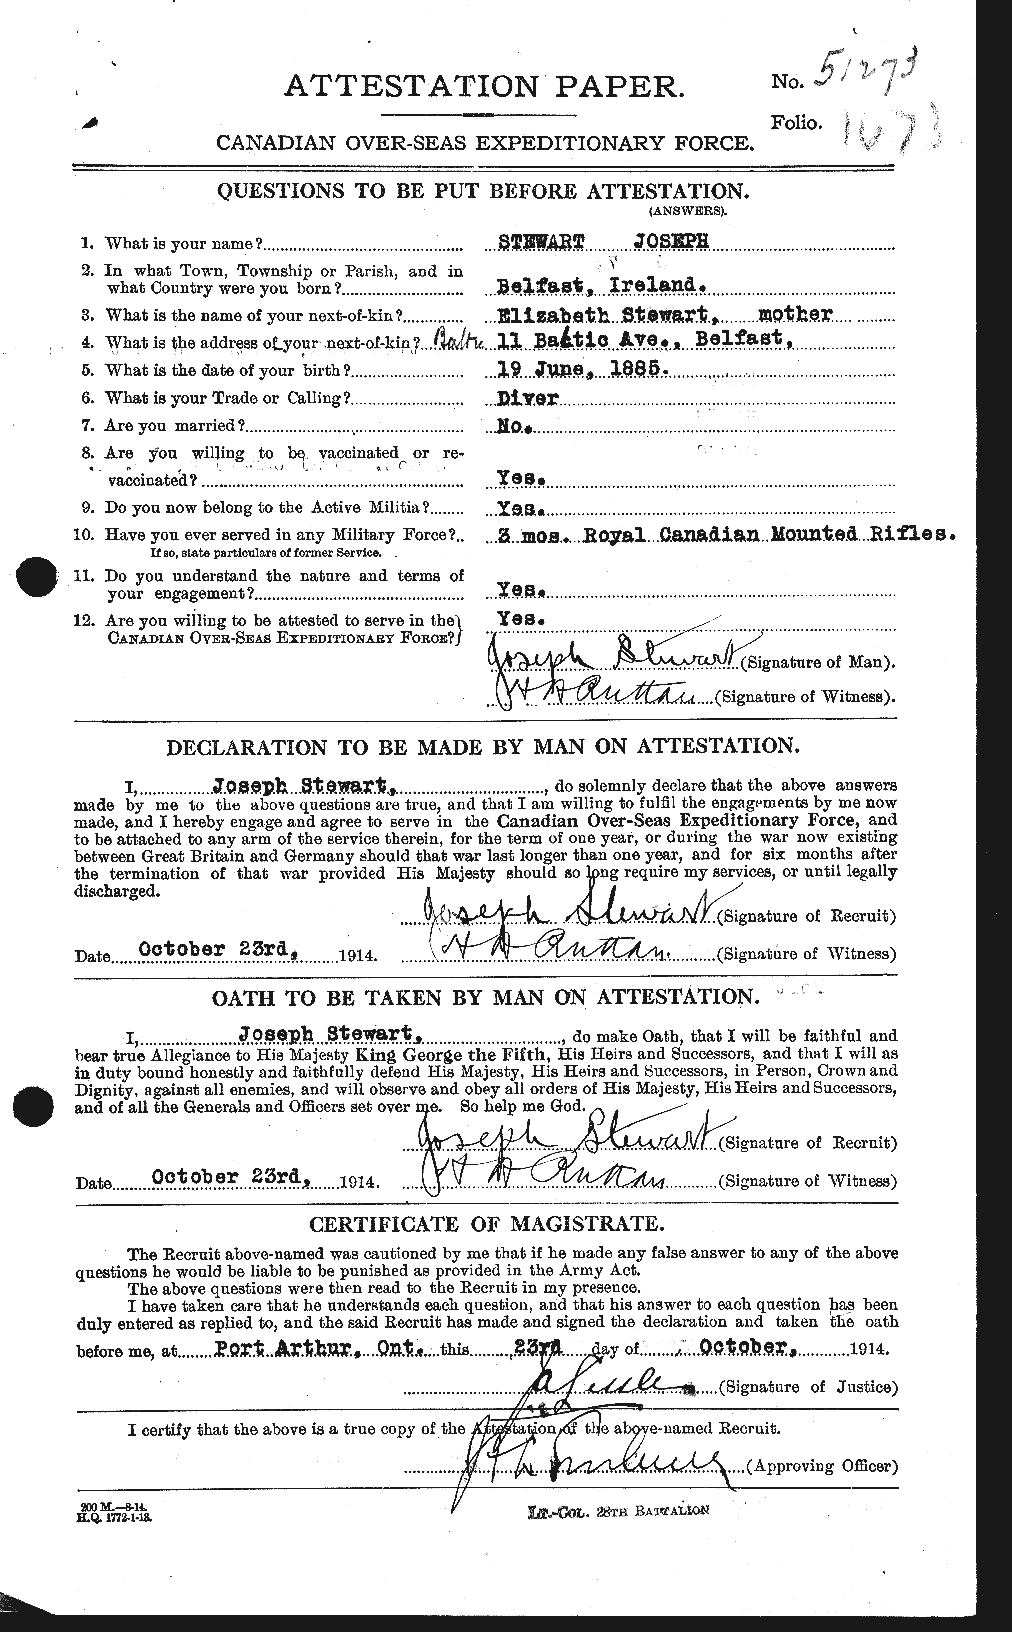 Personnel Records of the First World War - CEF 623714a